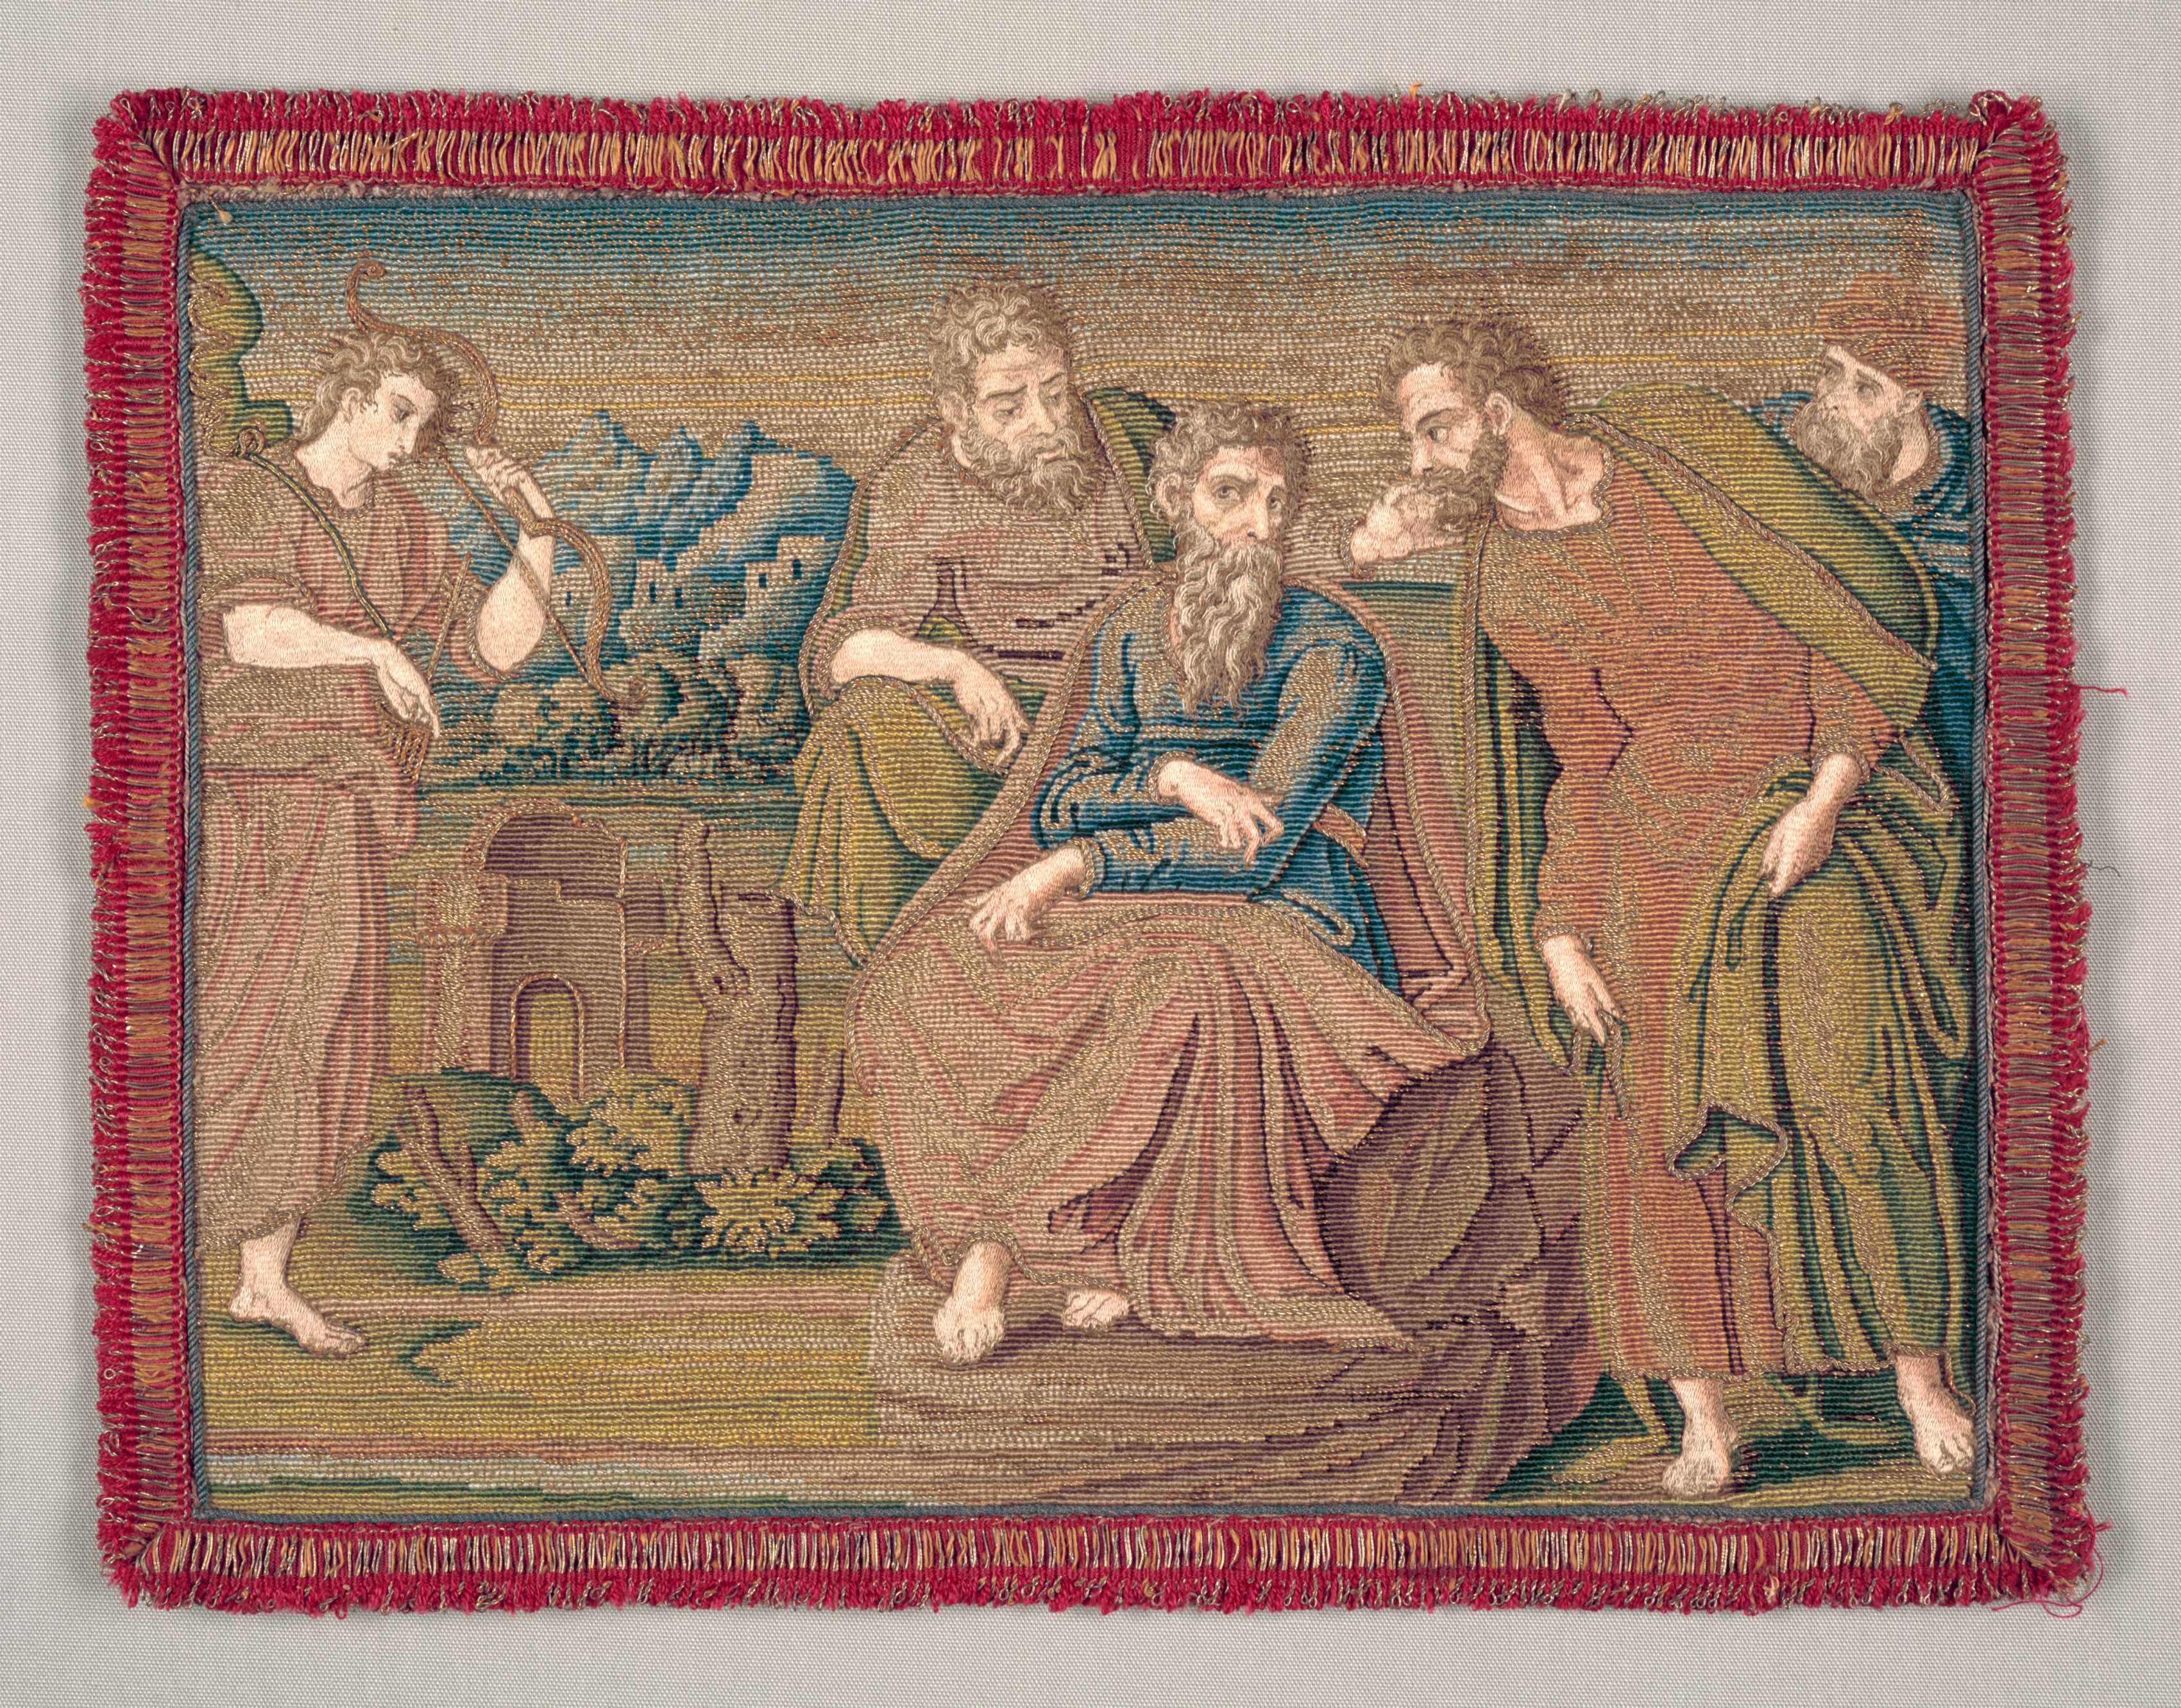 Apparel from a Dalmatic